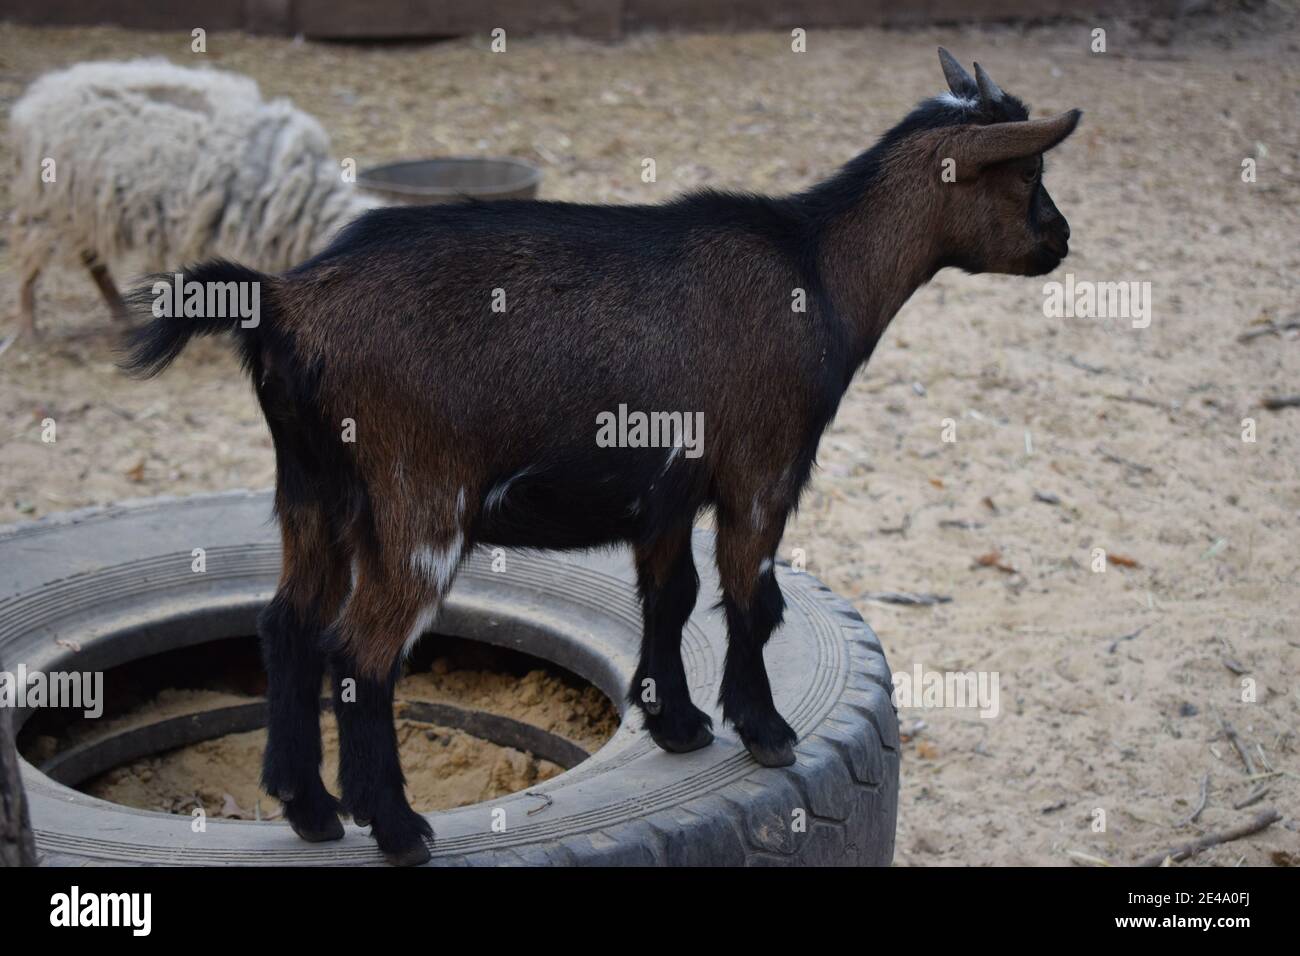 Little goat kid standing on a tire in a farm. A brown goat kid is standing on a tire at a contact zoo Stock Photo